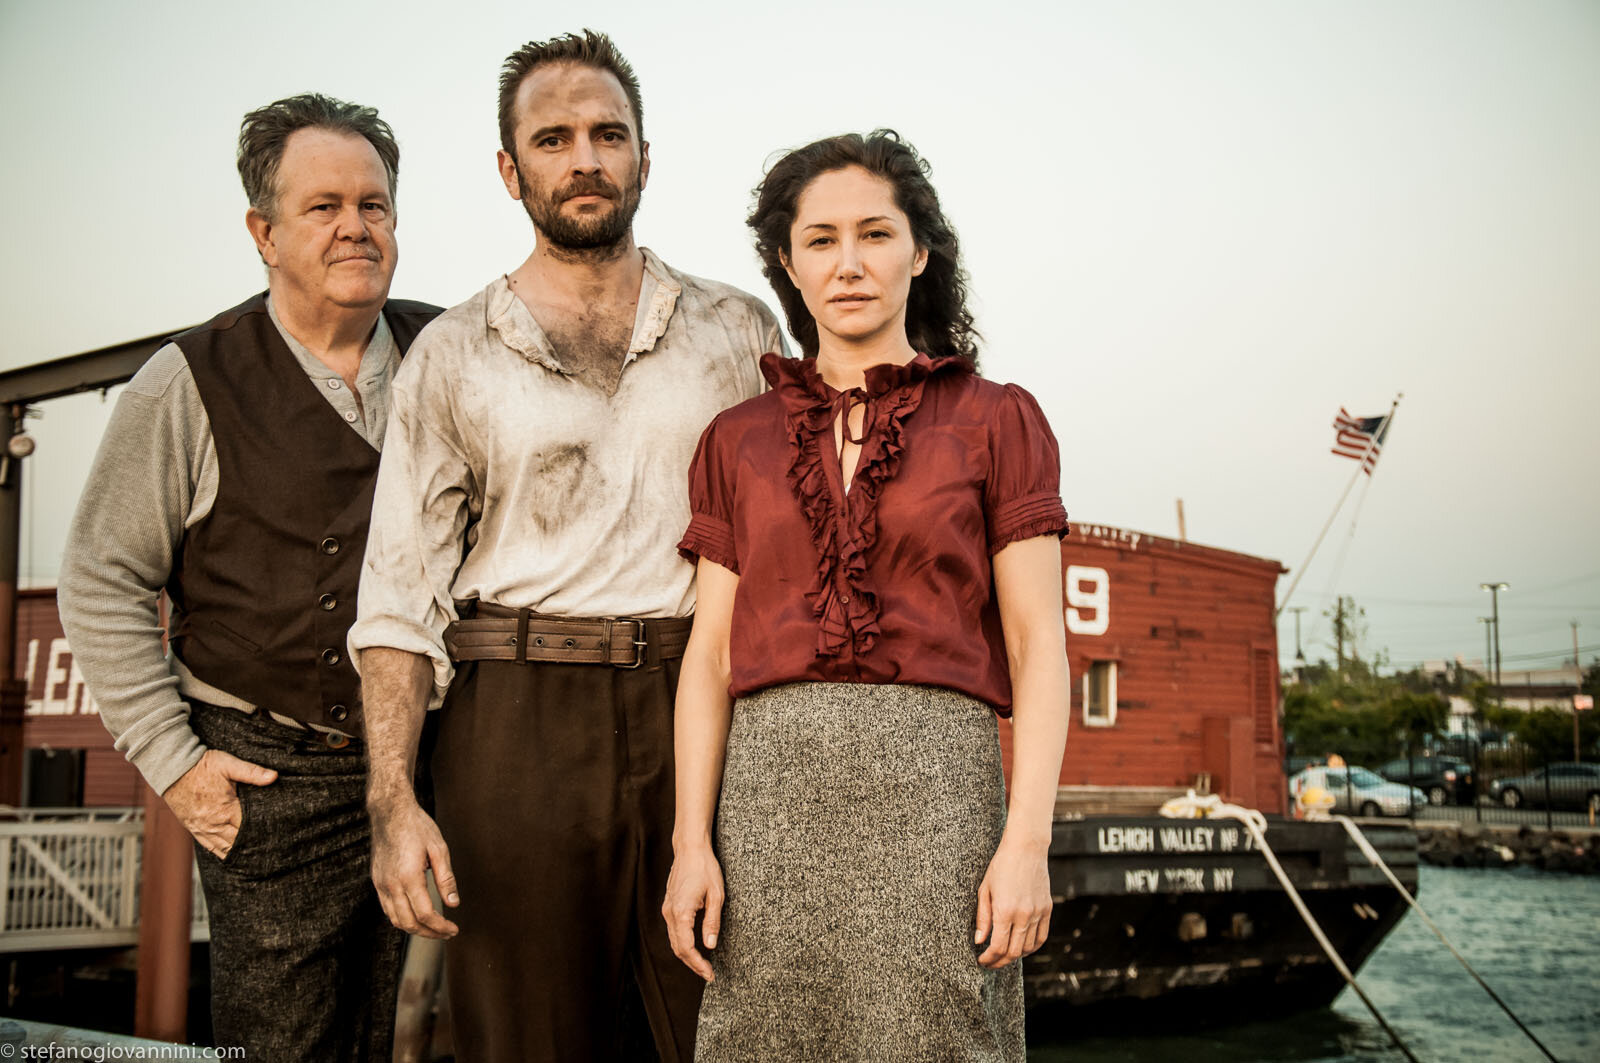  Eugene O'Neill's theatre play Anna Christie on barge at Conover street Red Hook Brooklyn NYActors: Rahaleh Nassri  (the woman)John O'Creagh (the older man)Gene Gillette (the younger man) Laura Tesman  (the director)  Owner of the barge, director of 